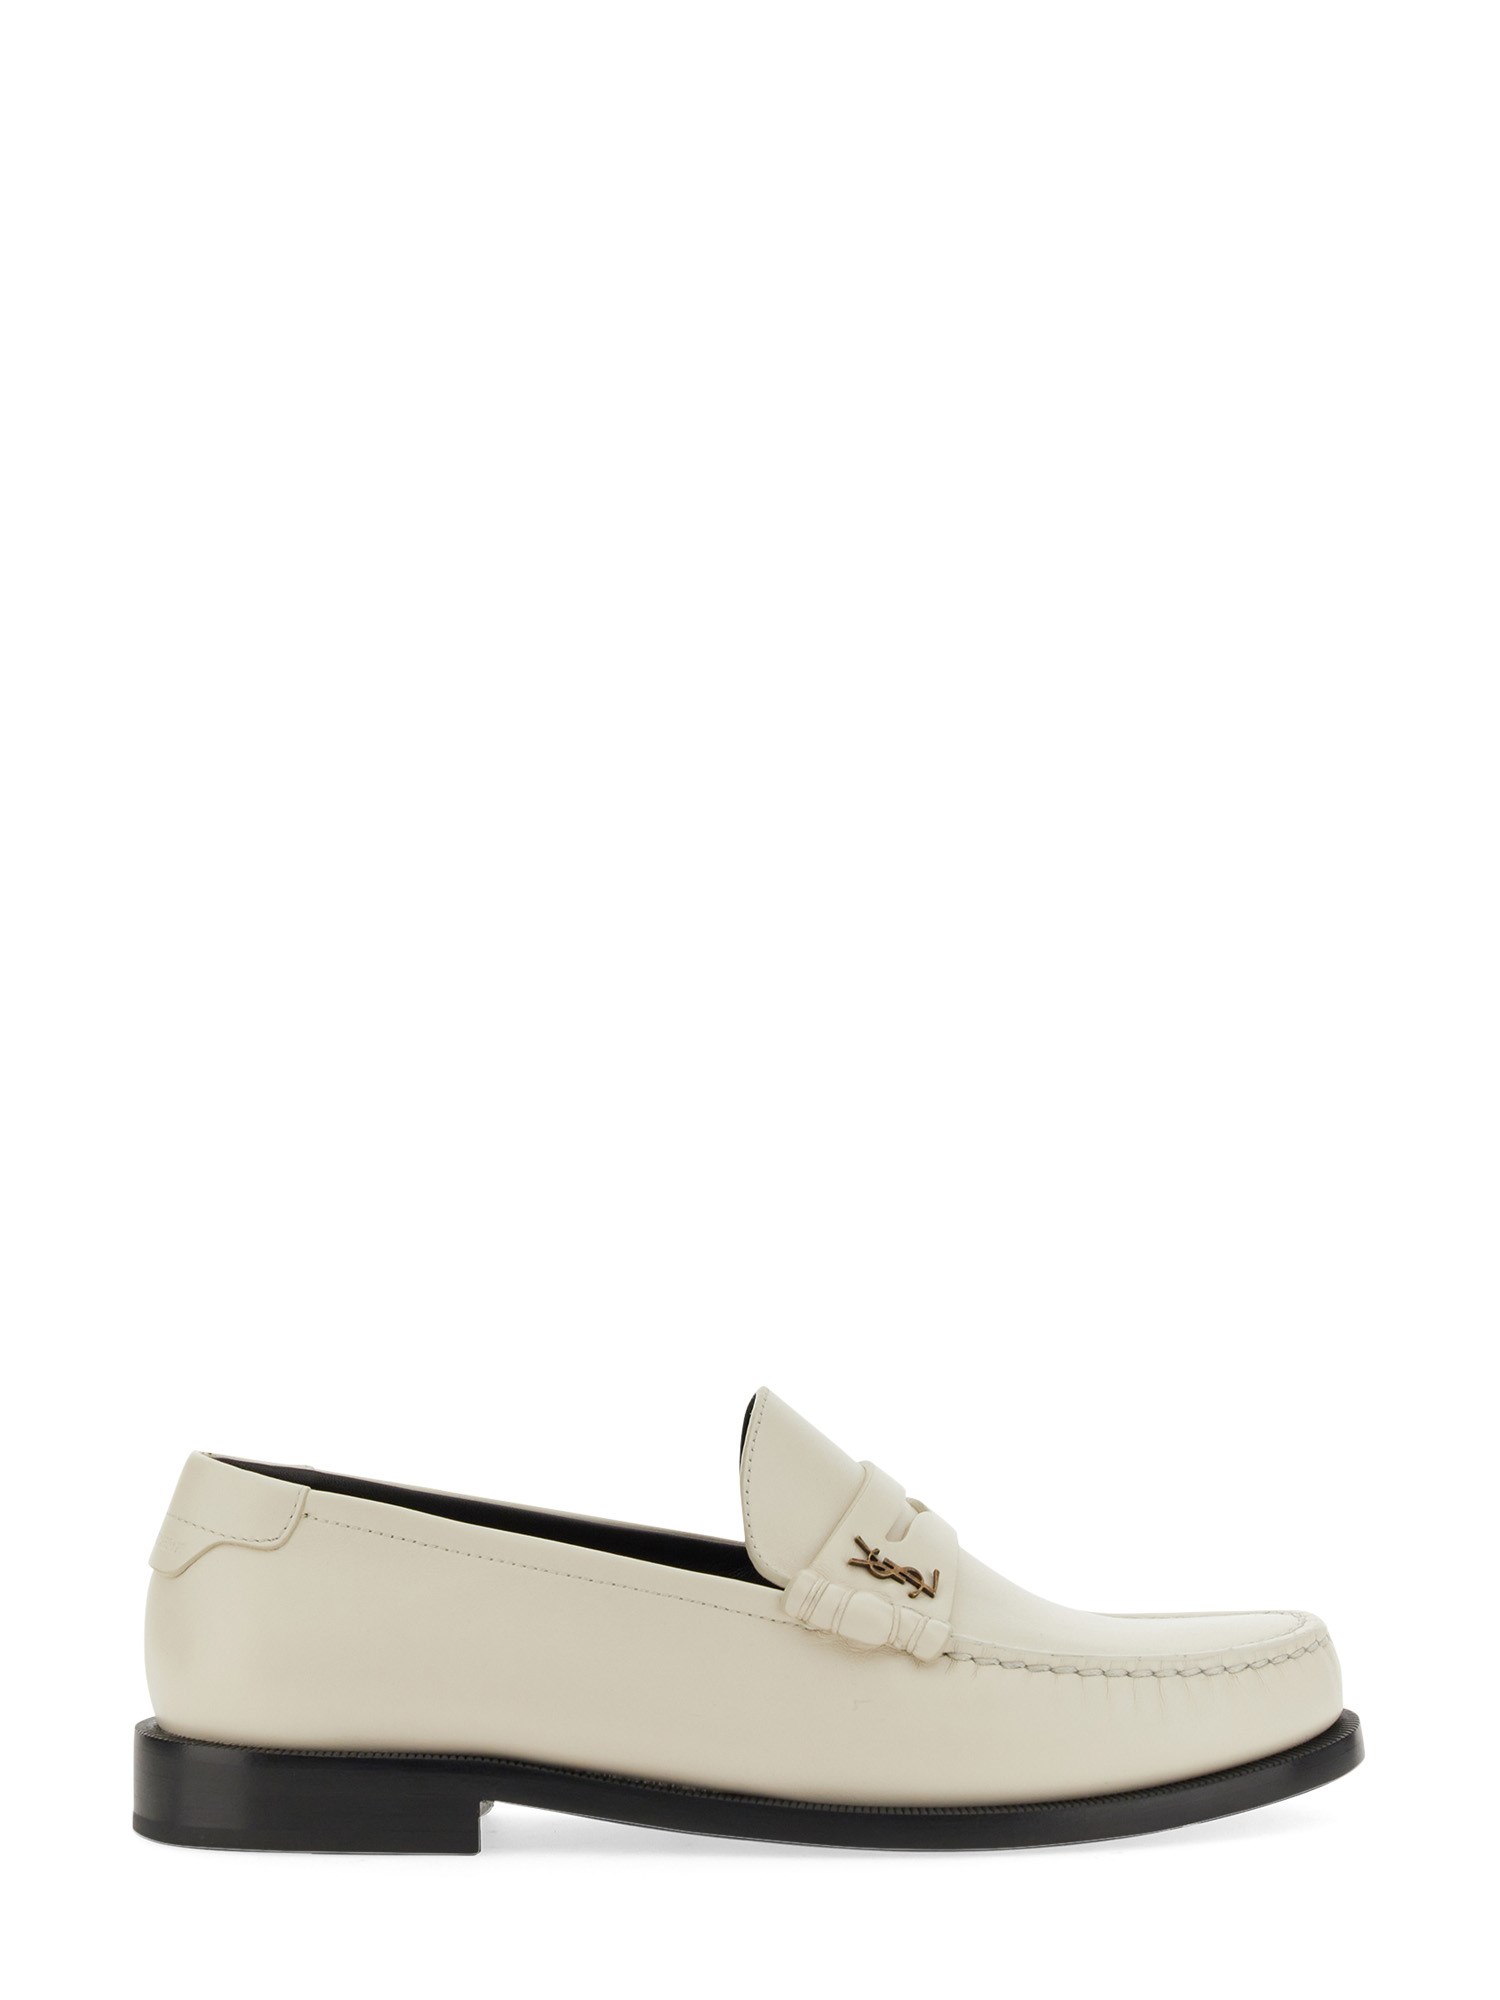 saint laurent leather loafer with monogram